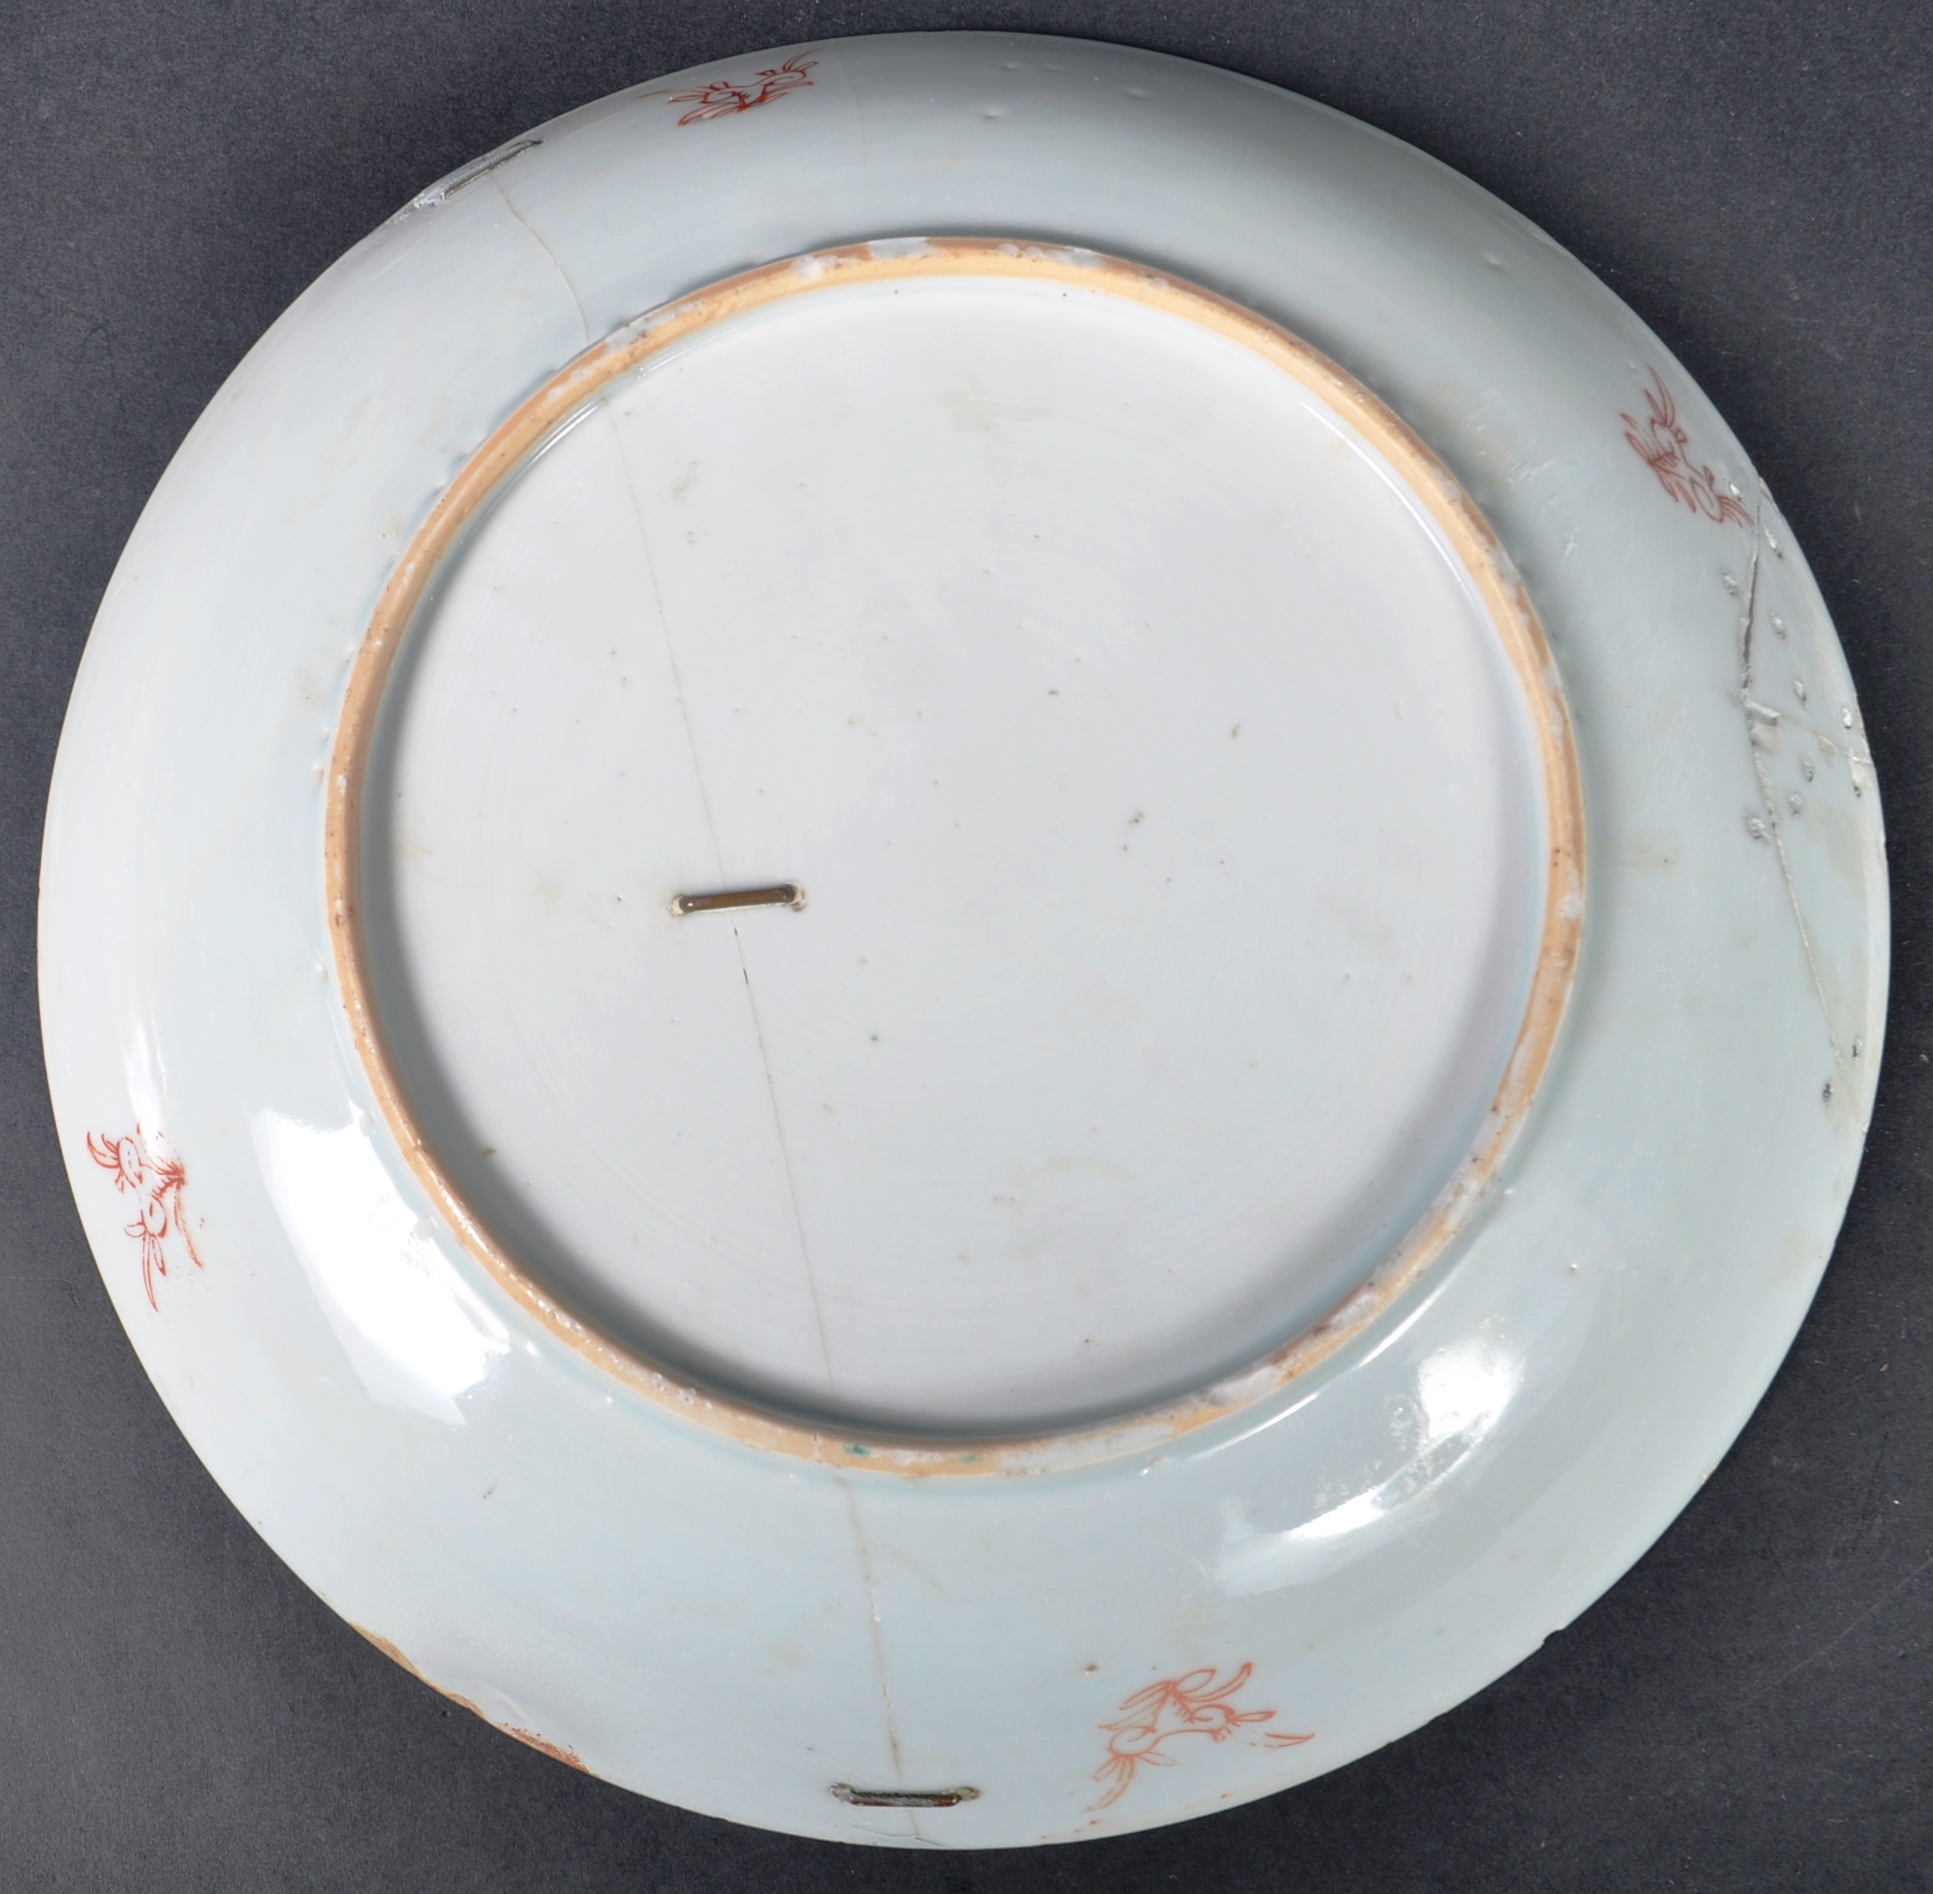 TWO 18TH CENTURY CHINESE QIANLONG PORCELAIN PLATES - Image 11 of 11